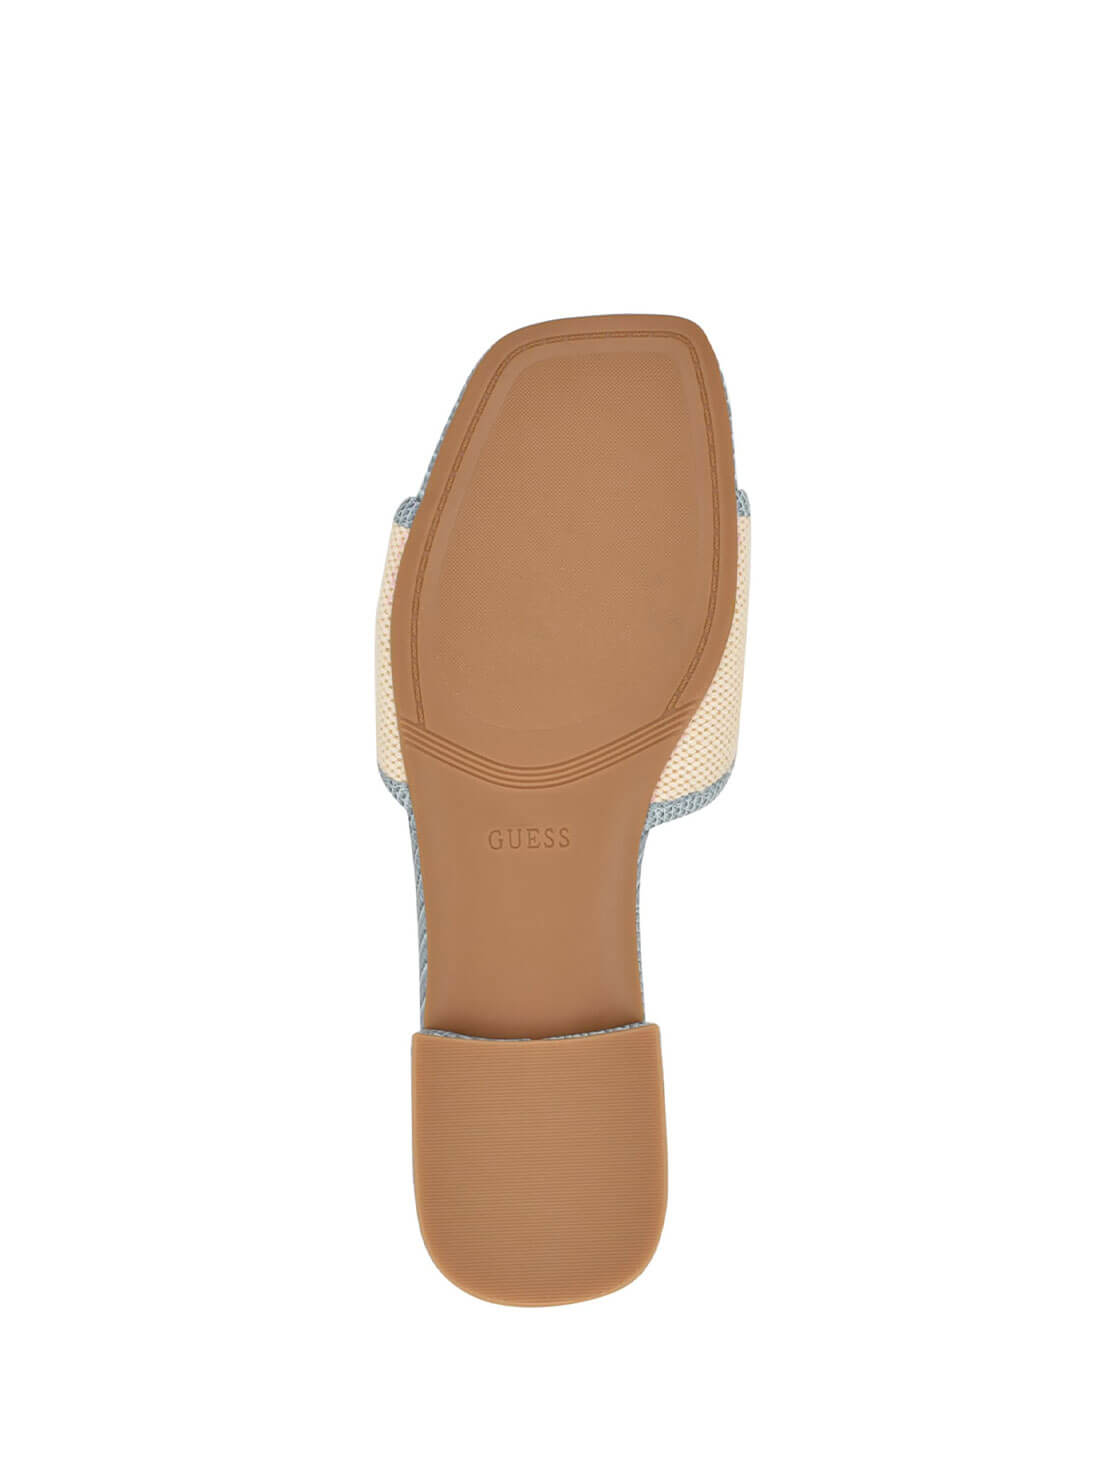 Light Blue Natural Tampa Slide Sandals | GUESS Women's Shoes | bottom view